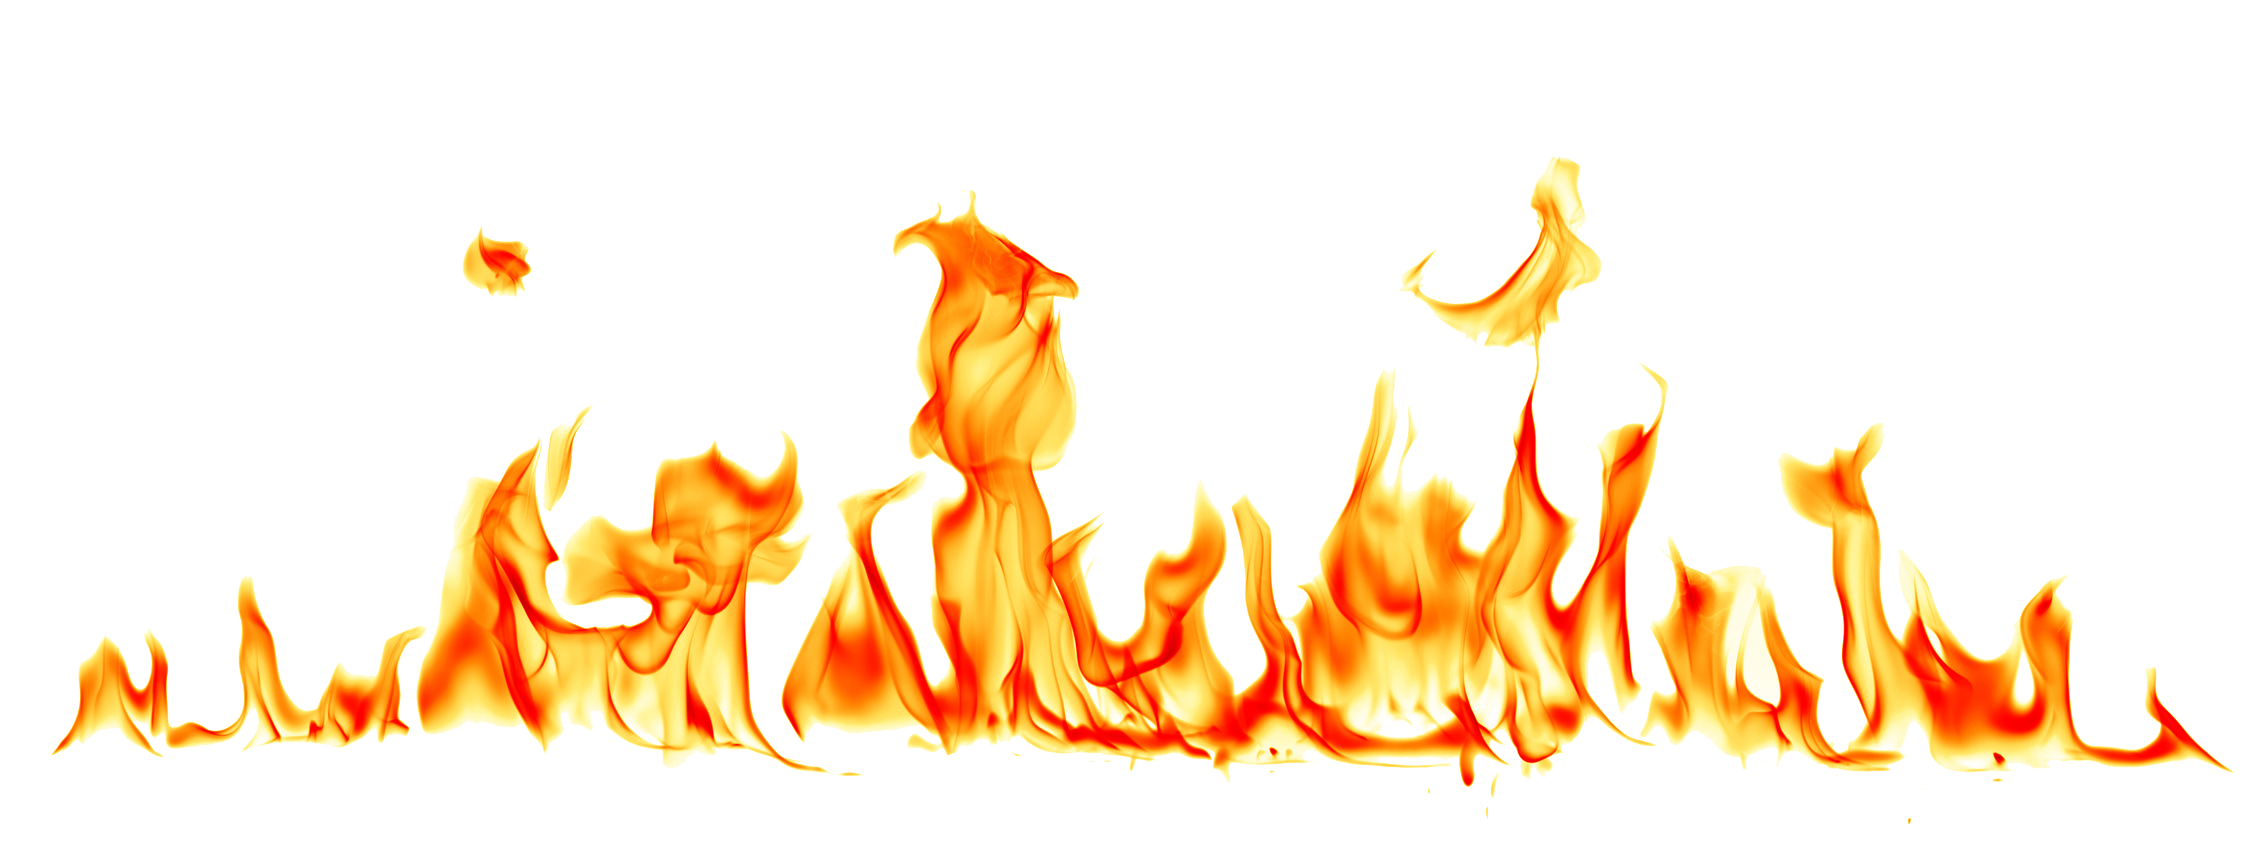 Fire Flames High-Quality PNG 